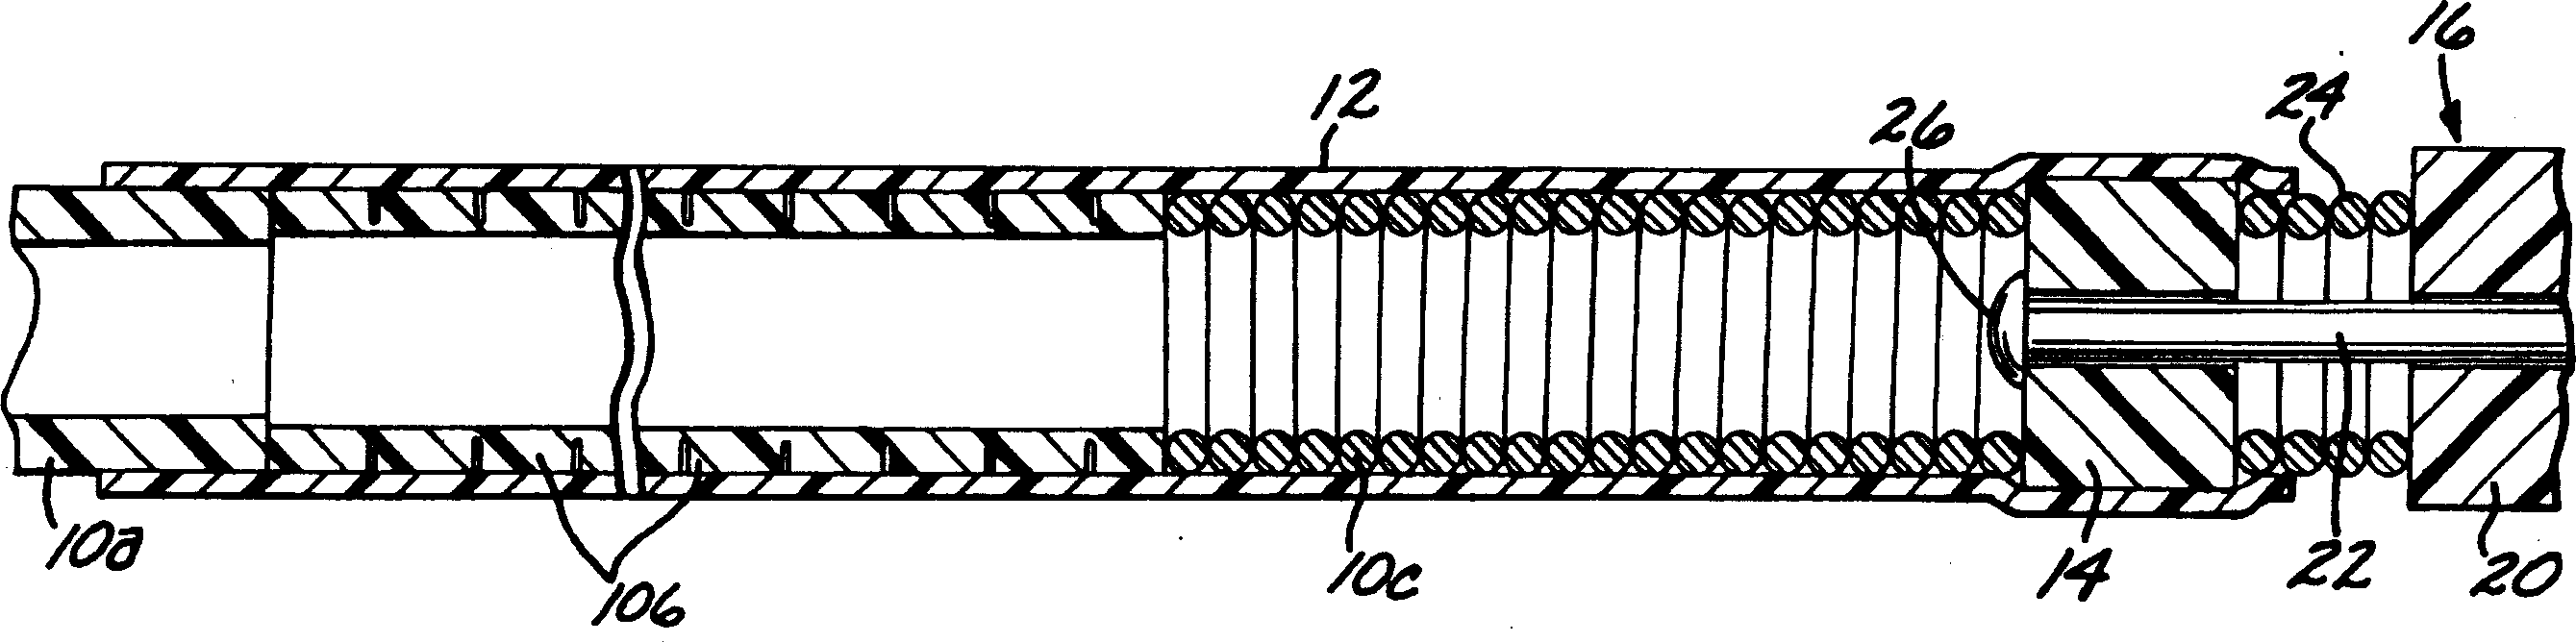 Mechanism for the deployment of endovascular implants